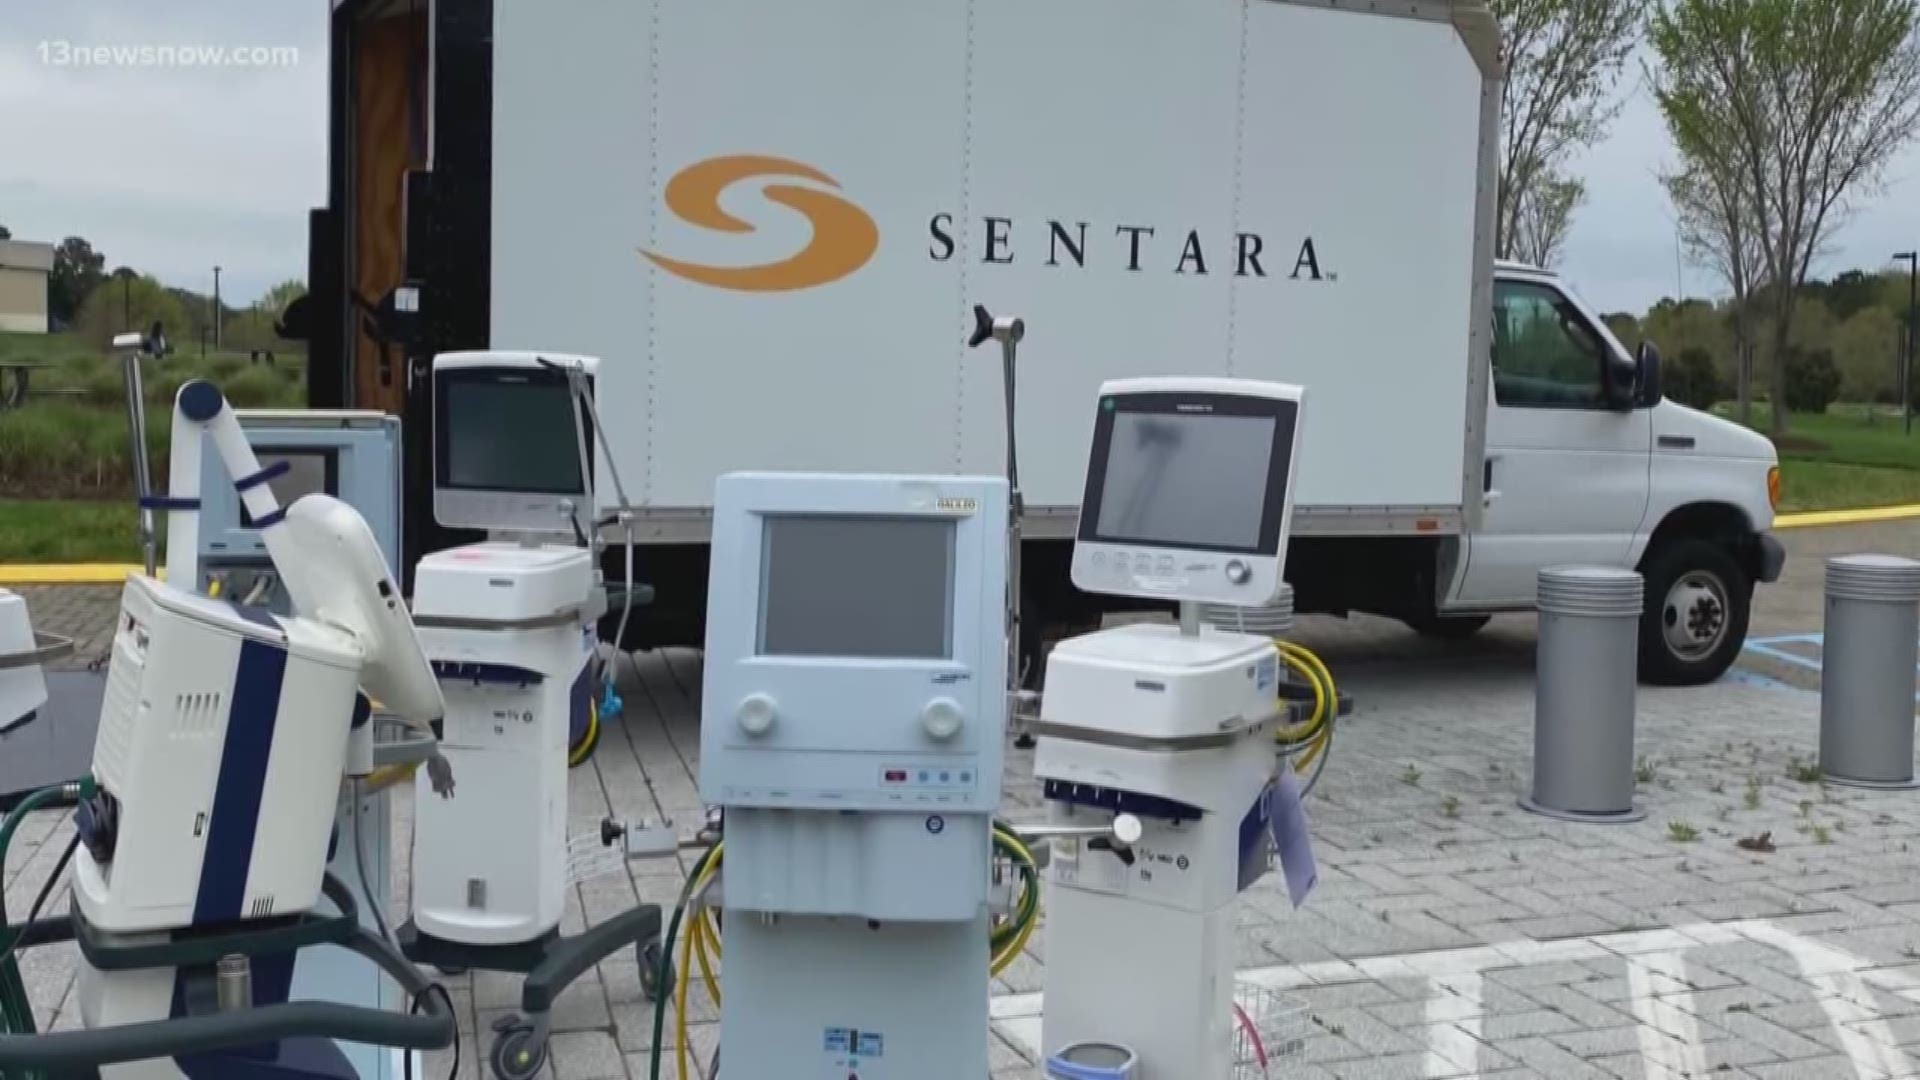 While school is out, Tidewater Community College decided to let Sentara Healthcare borrow 11 ventilators for people in the hospital with COVID-19.